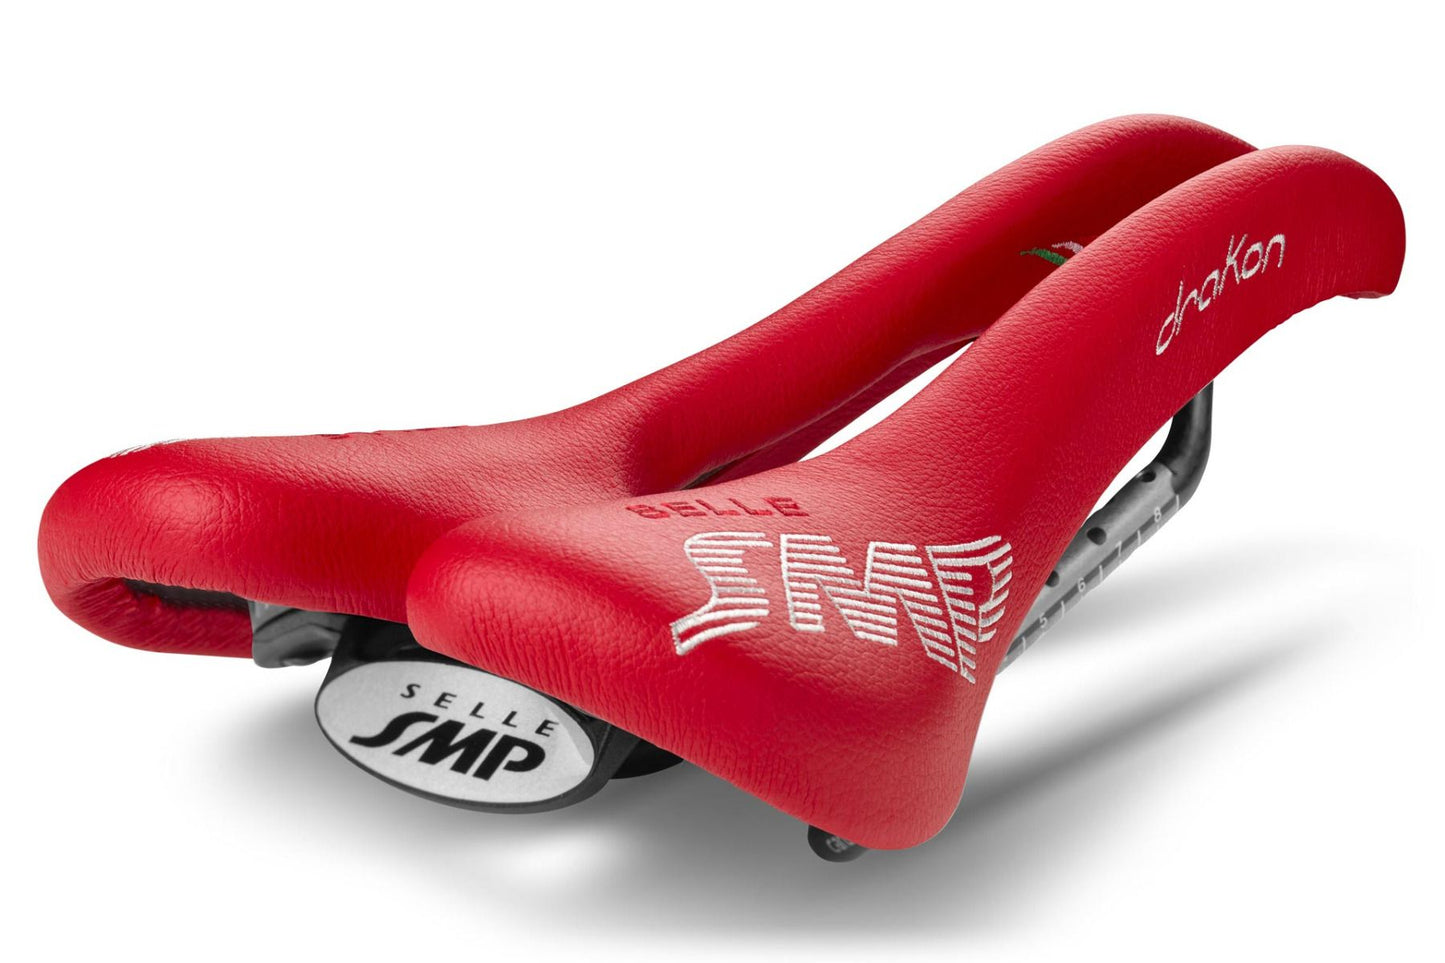 Selle SMP Drakon Saddle with Carbon Rails (Red)